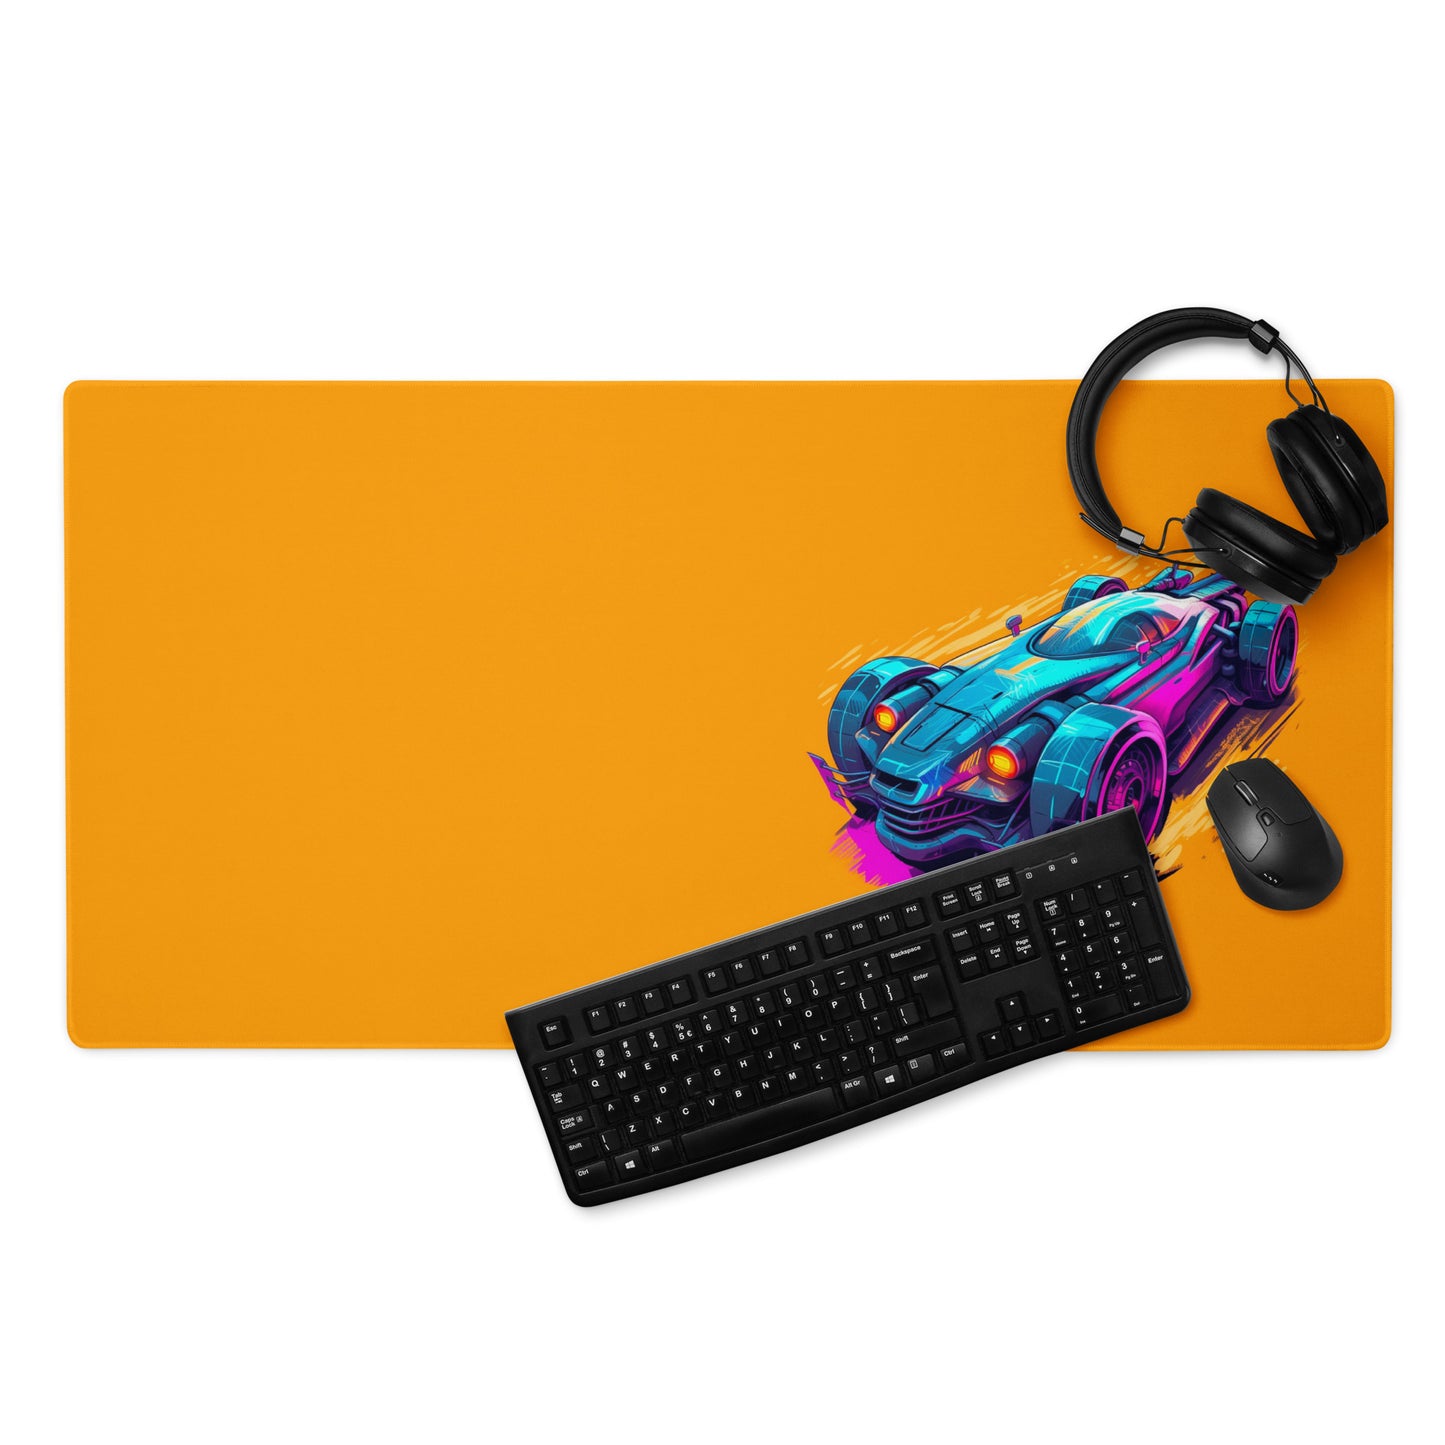 A 36" x 18" desk pad with a futuristic race car pictured on the right displayed with headphones, a keyboard and a mouse on it. Orange in color.